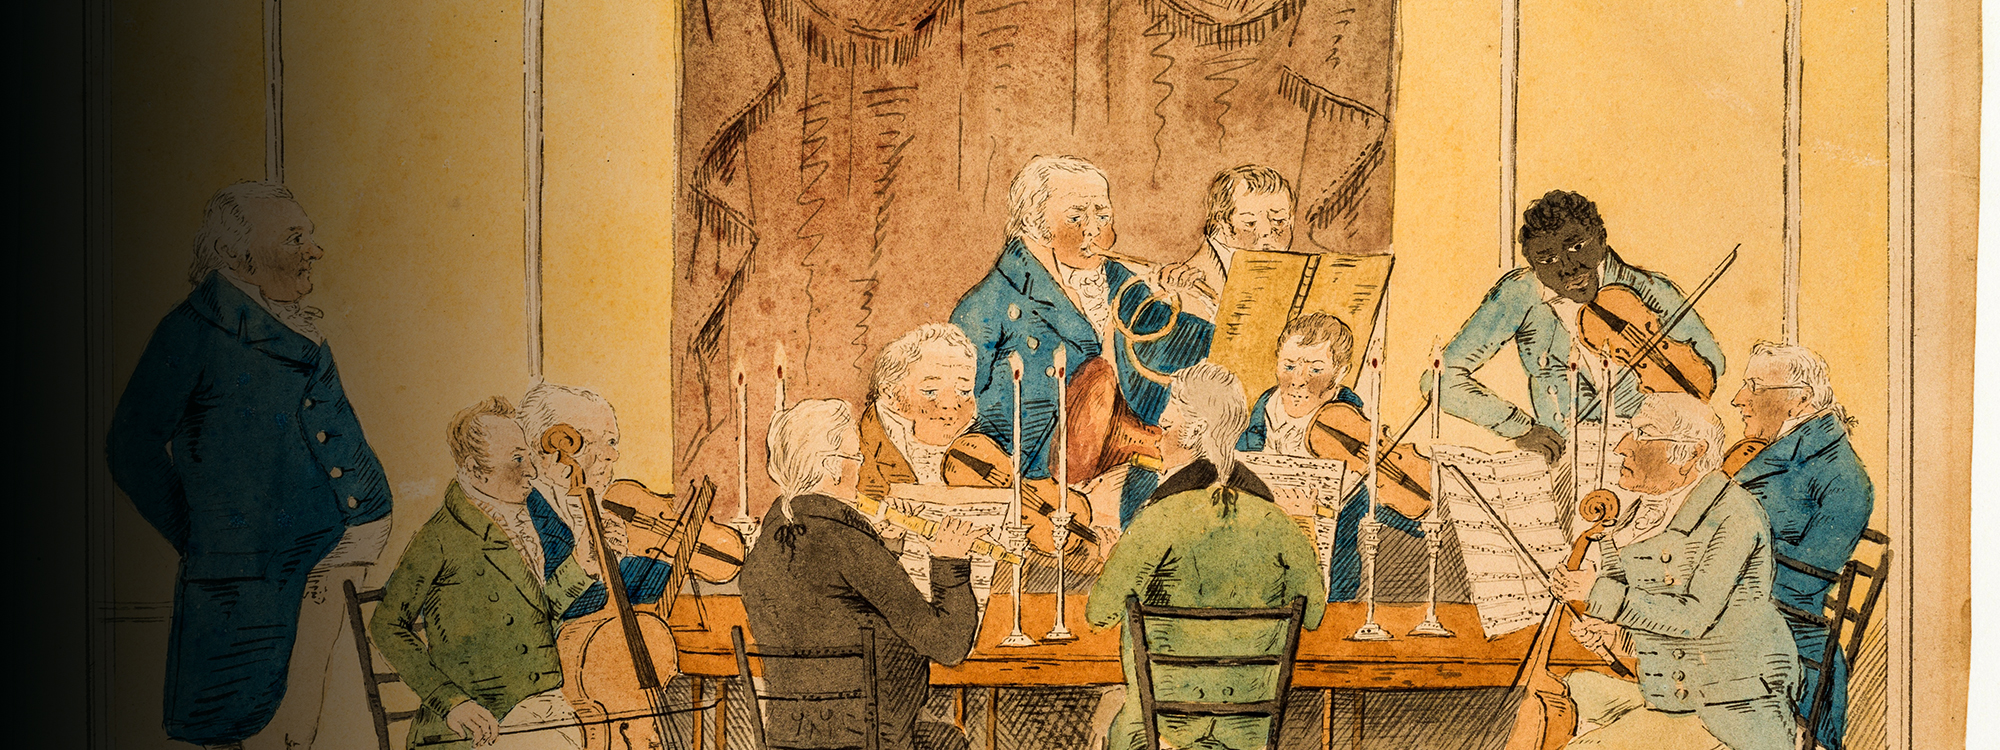 Print owned by Truro Museum depicting musicians in early 1800s including Joseph Emidy